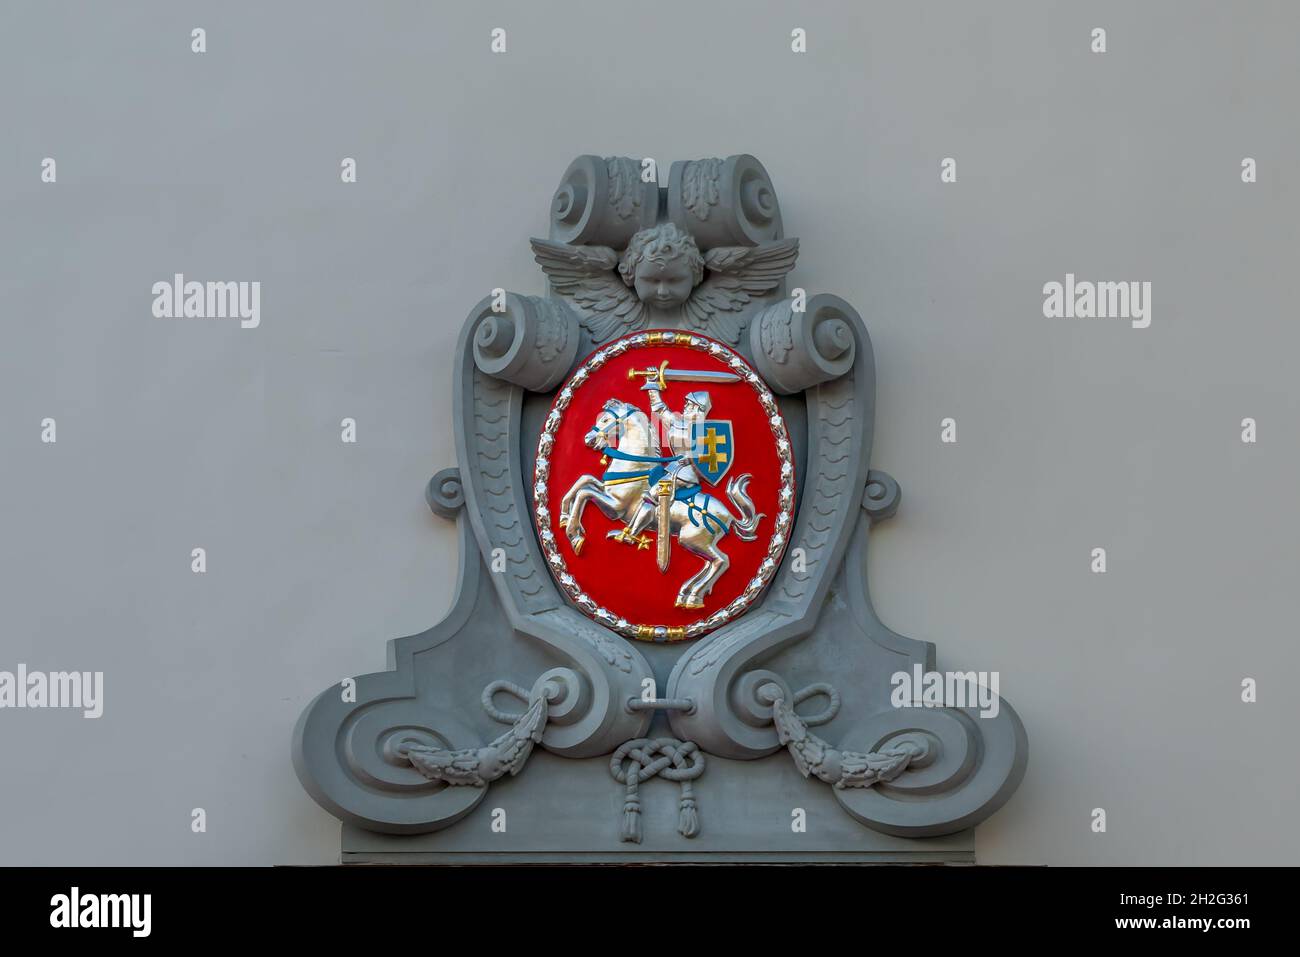 Coat of Arms of Lithuania with Vytis Knight - Lithuania Stock Photo